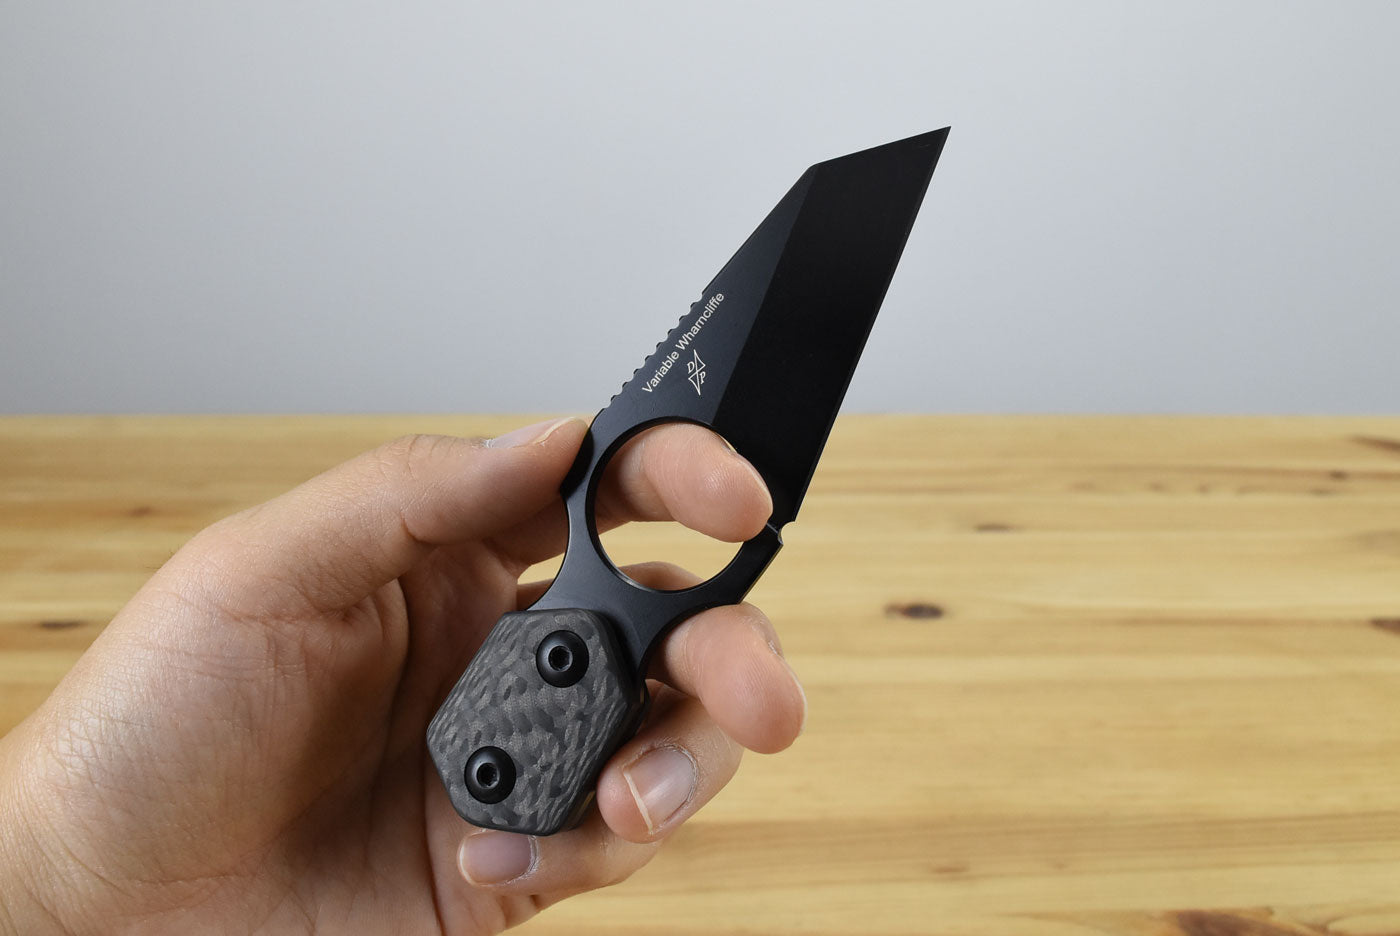 Kizer 1052A2 Variable Wharncliffe